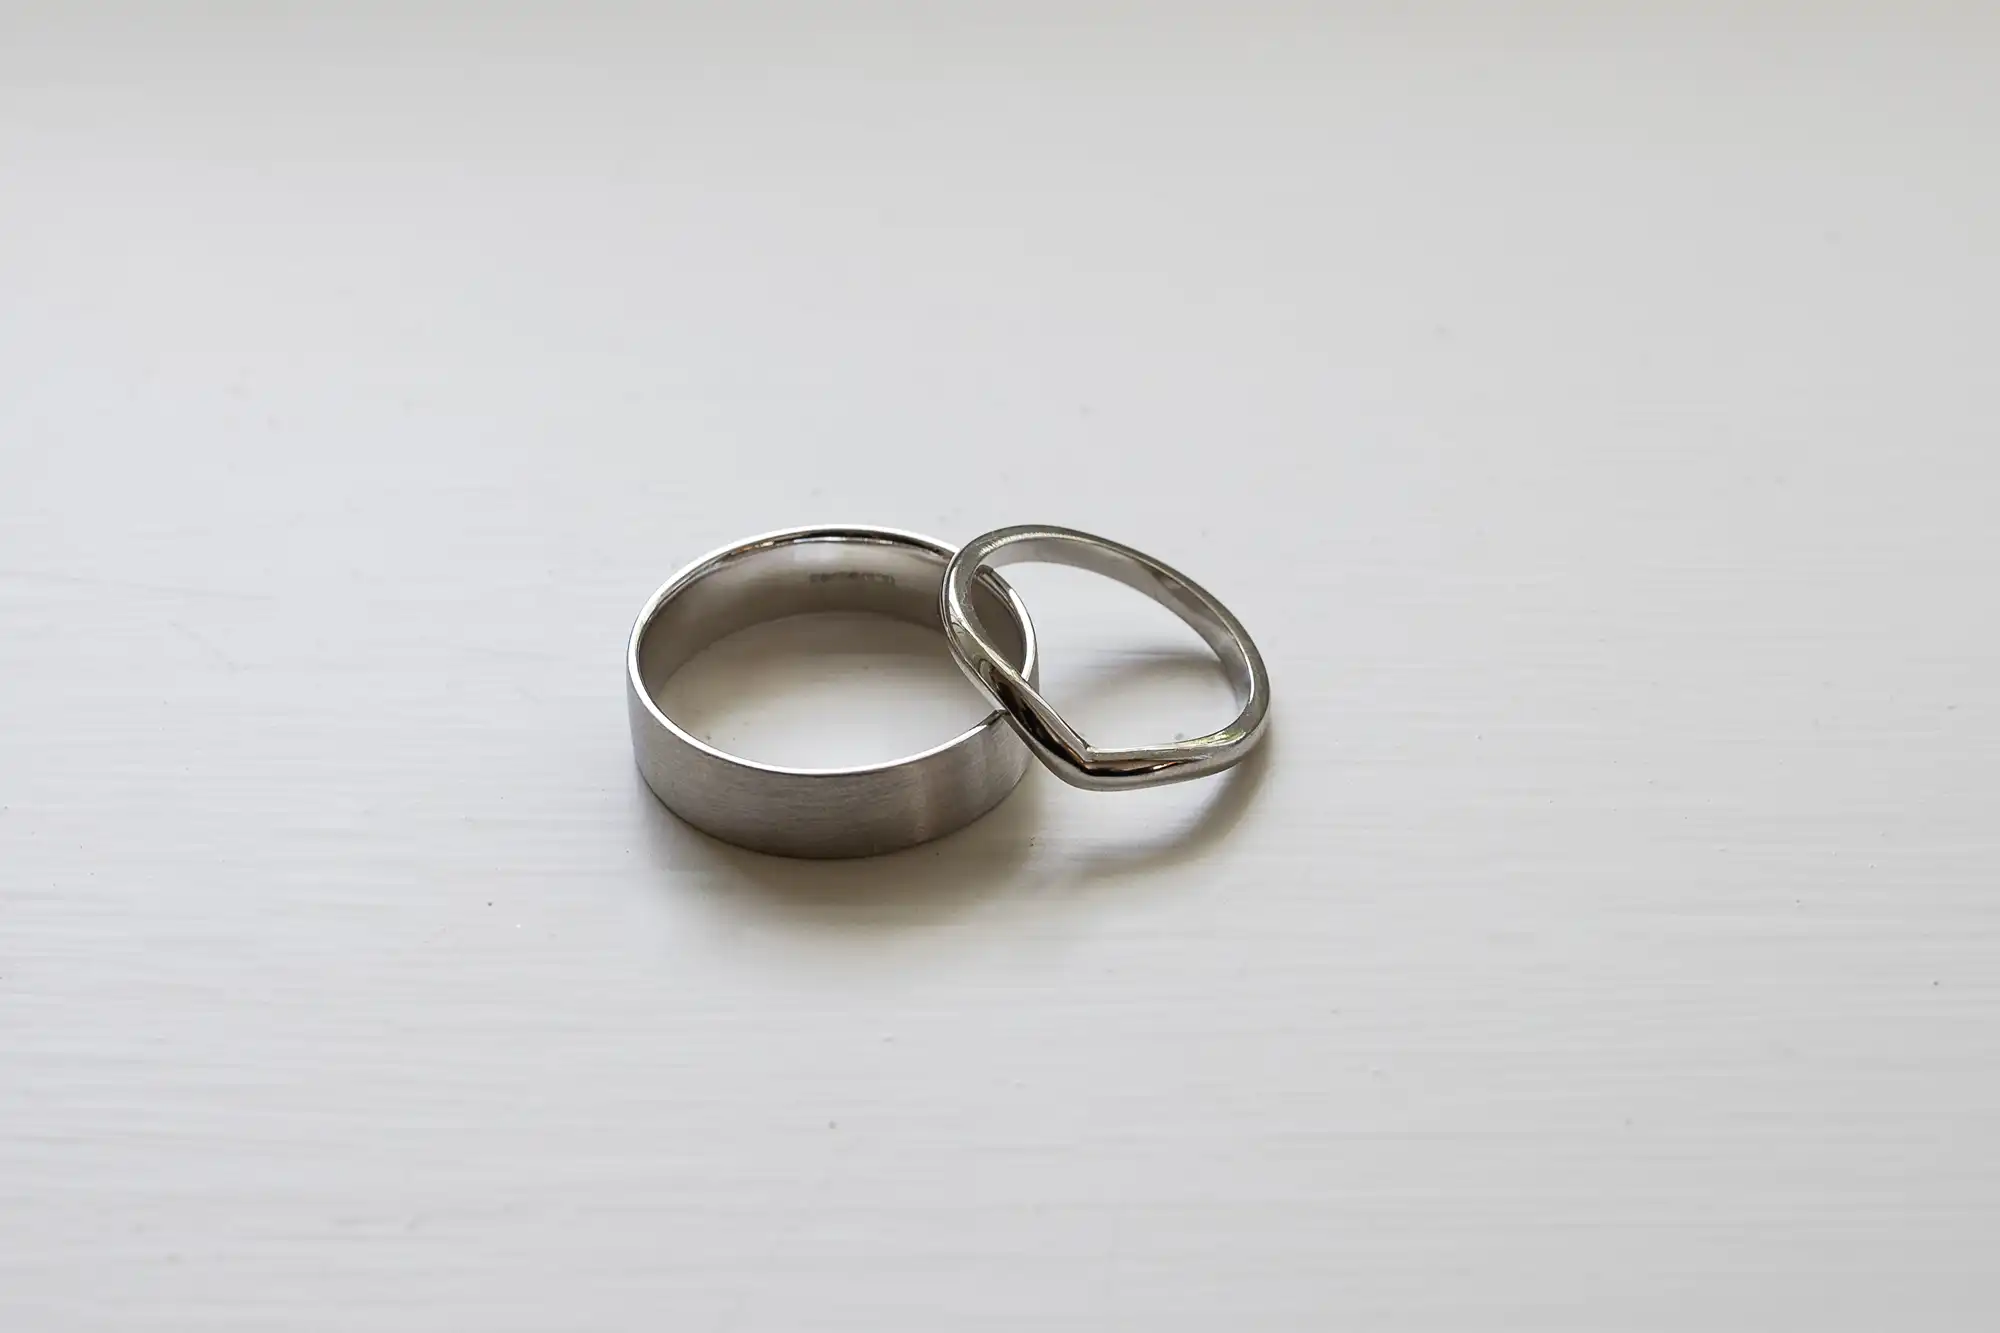 Two wedding rings, one with a classic band and the other with a twisted design, resting on a white surface.